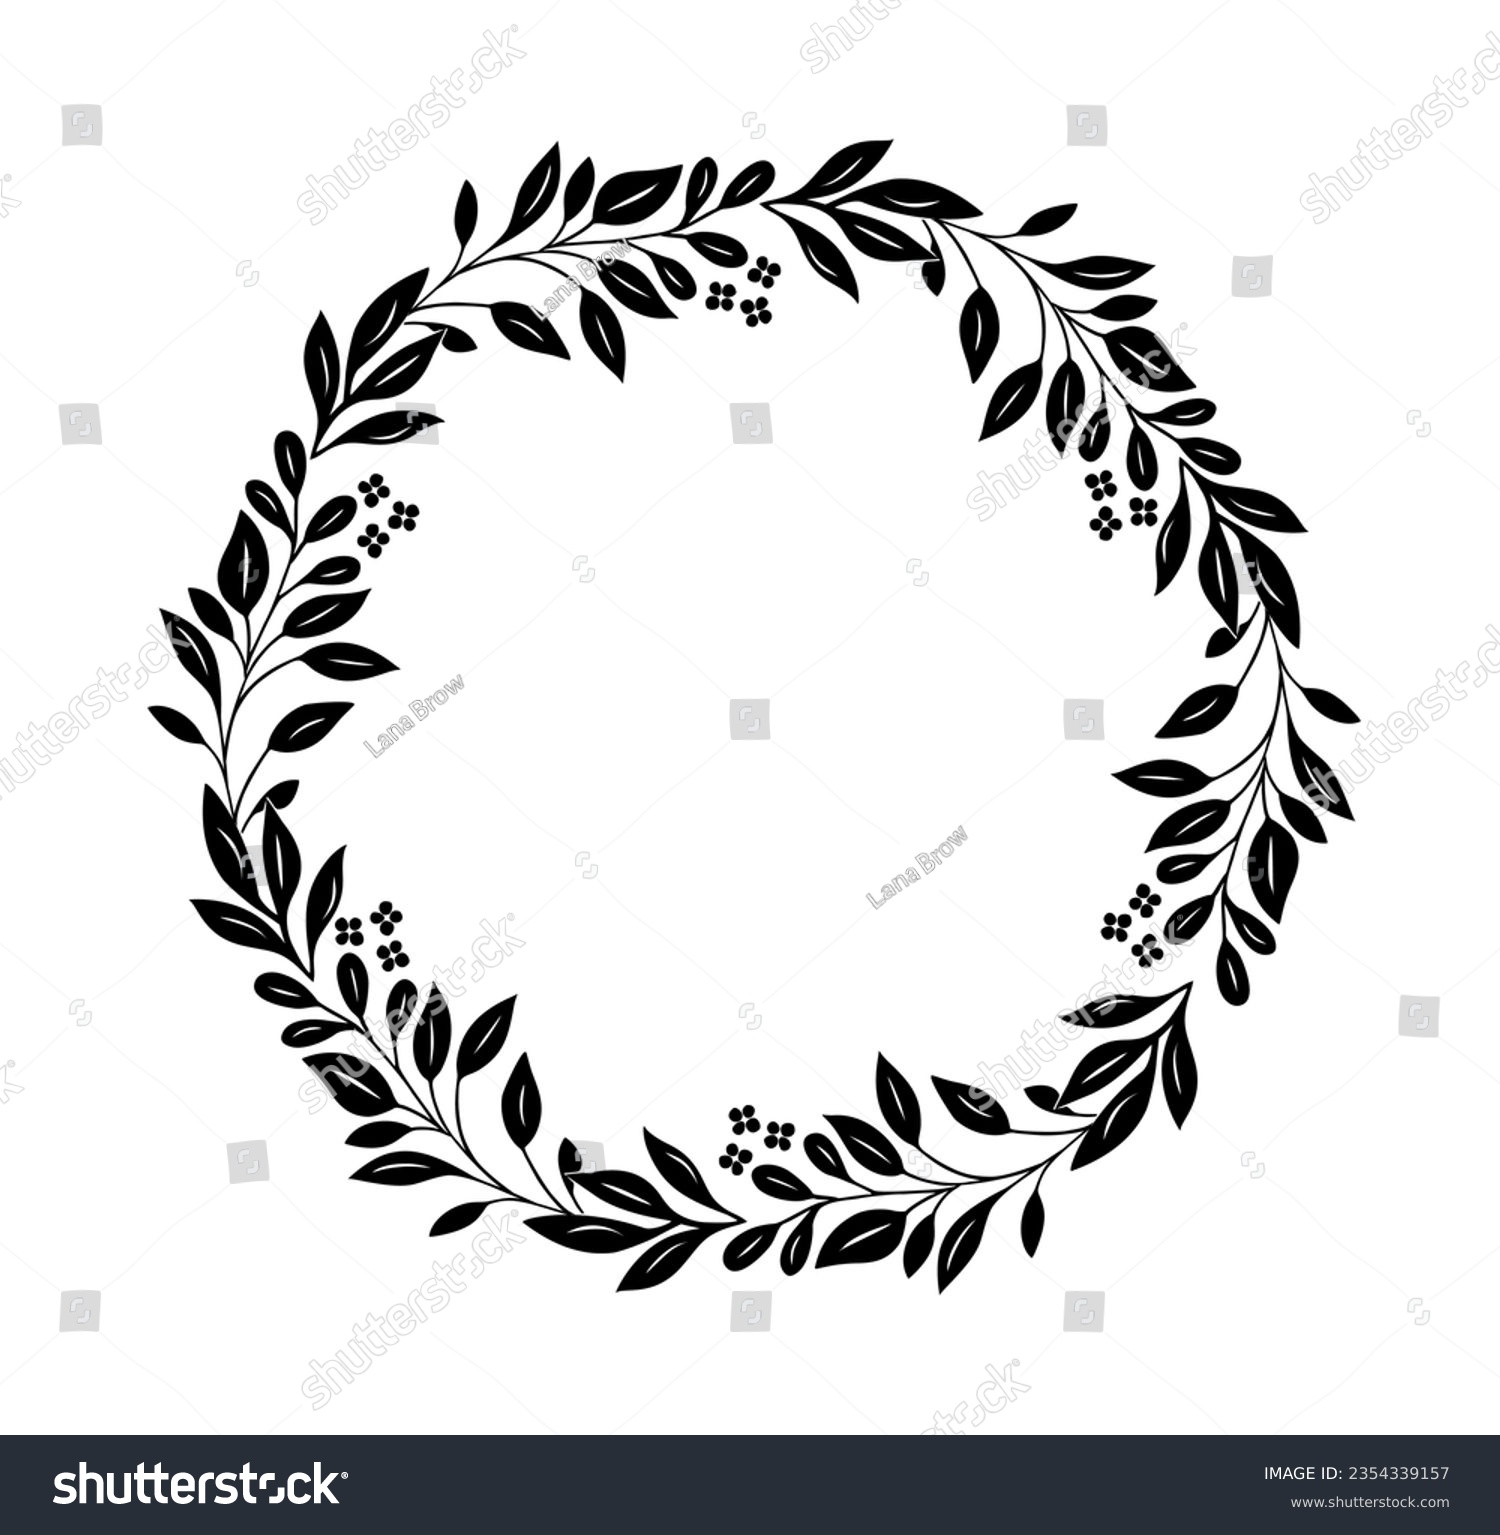 SVG of Hand drawn botanical wreath silhouette vector illustration isolated on white background. Circle frame with leaves and flowers black monochrome drawing. Elegant decorative design element svg